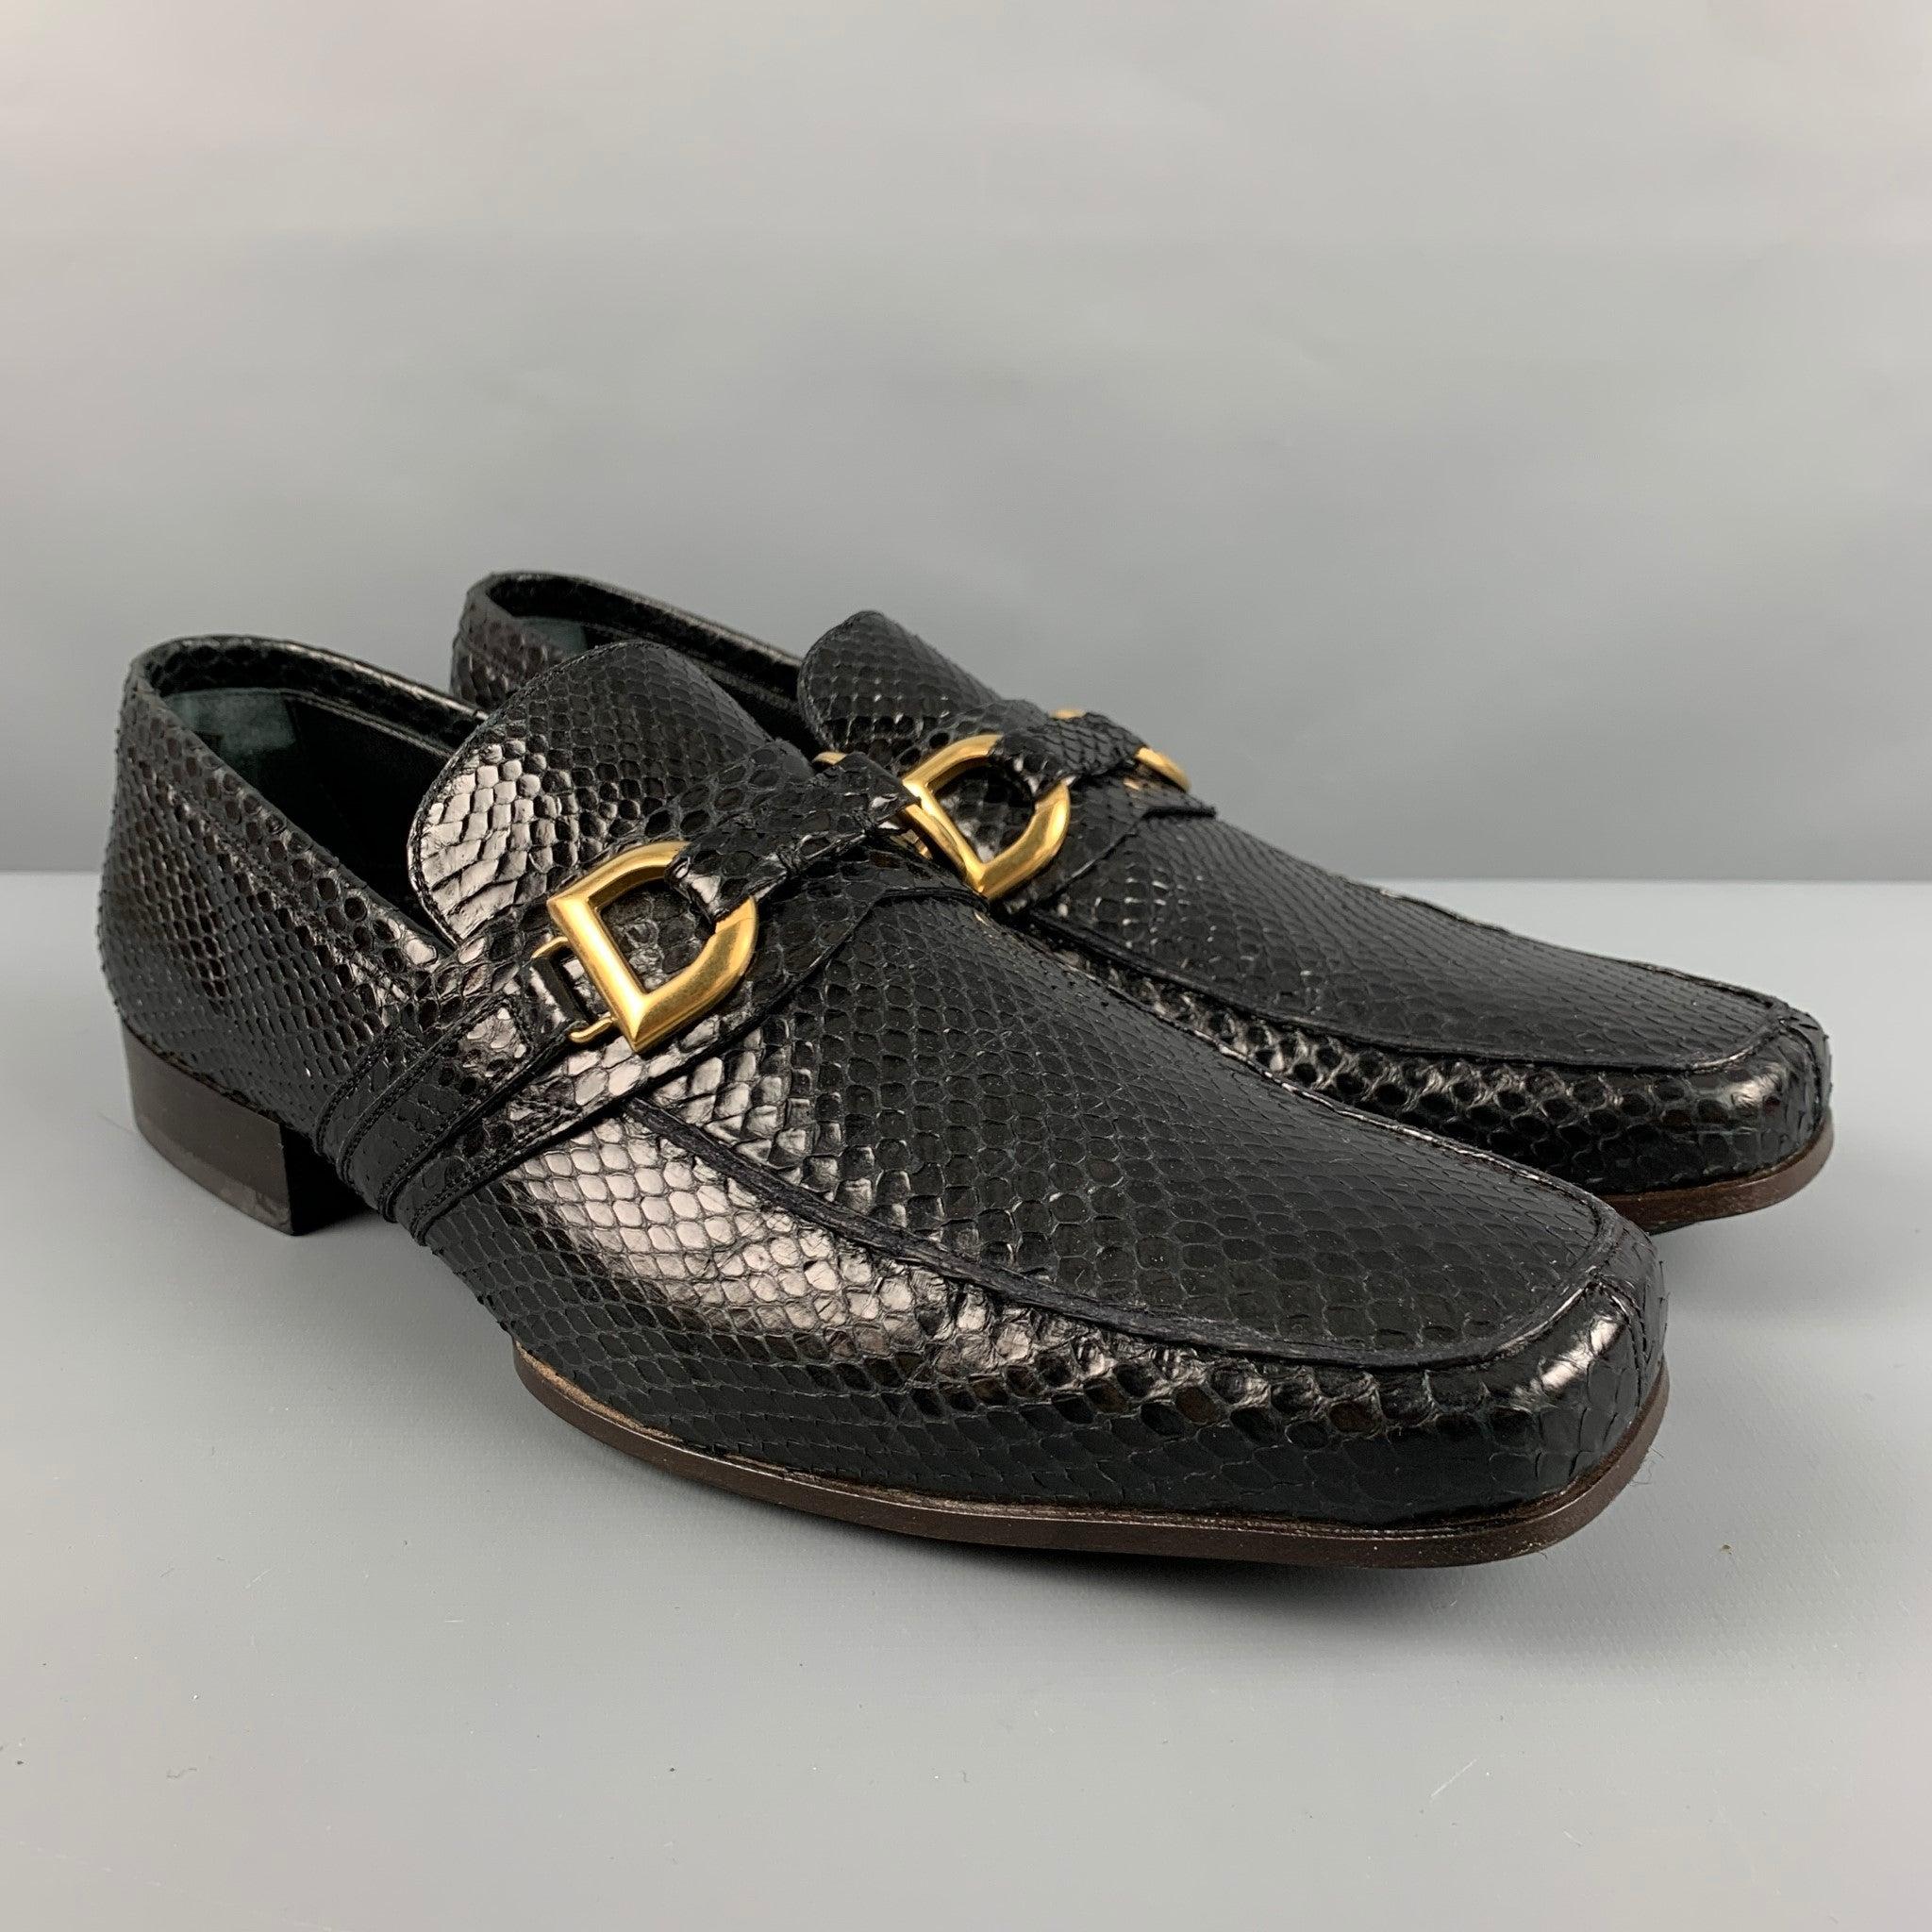 DOLCE & GABBANA loafers comes in a black textured leather featuring a gold tone D &G hardware detail, and a slip on style. Made in Italy.Very Good Pre-Owned Condition. Minor signs of wear. 

Marked:   1303 8070 6Outsole: 11.5 inches  x 4 inches 
  
